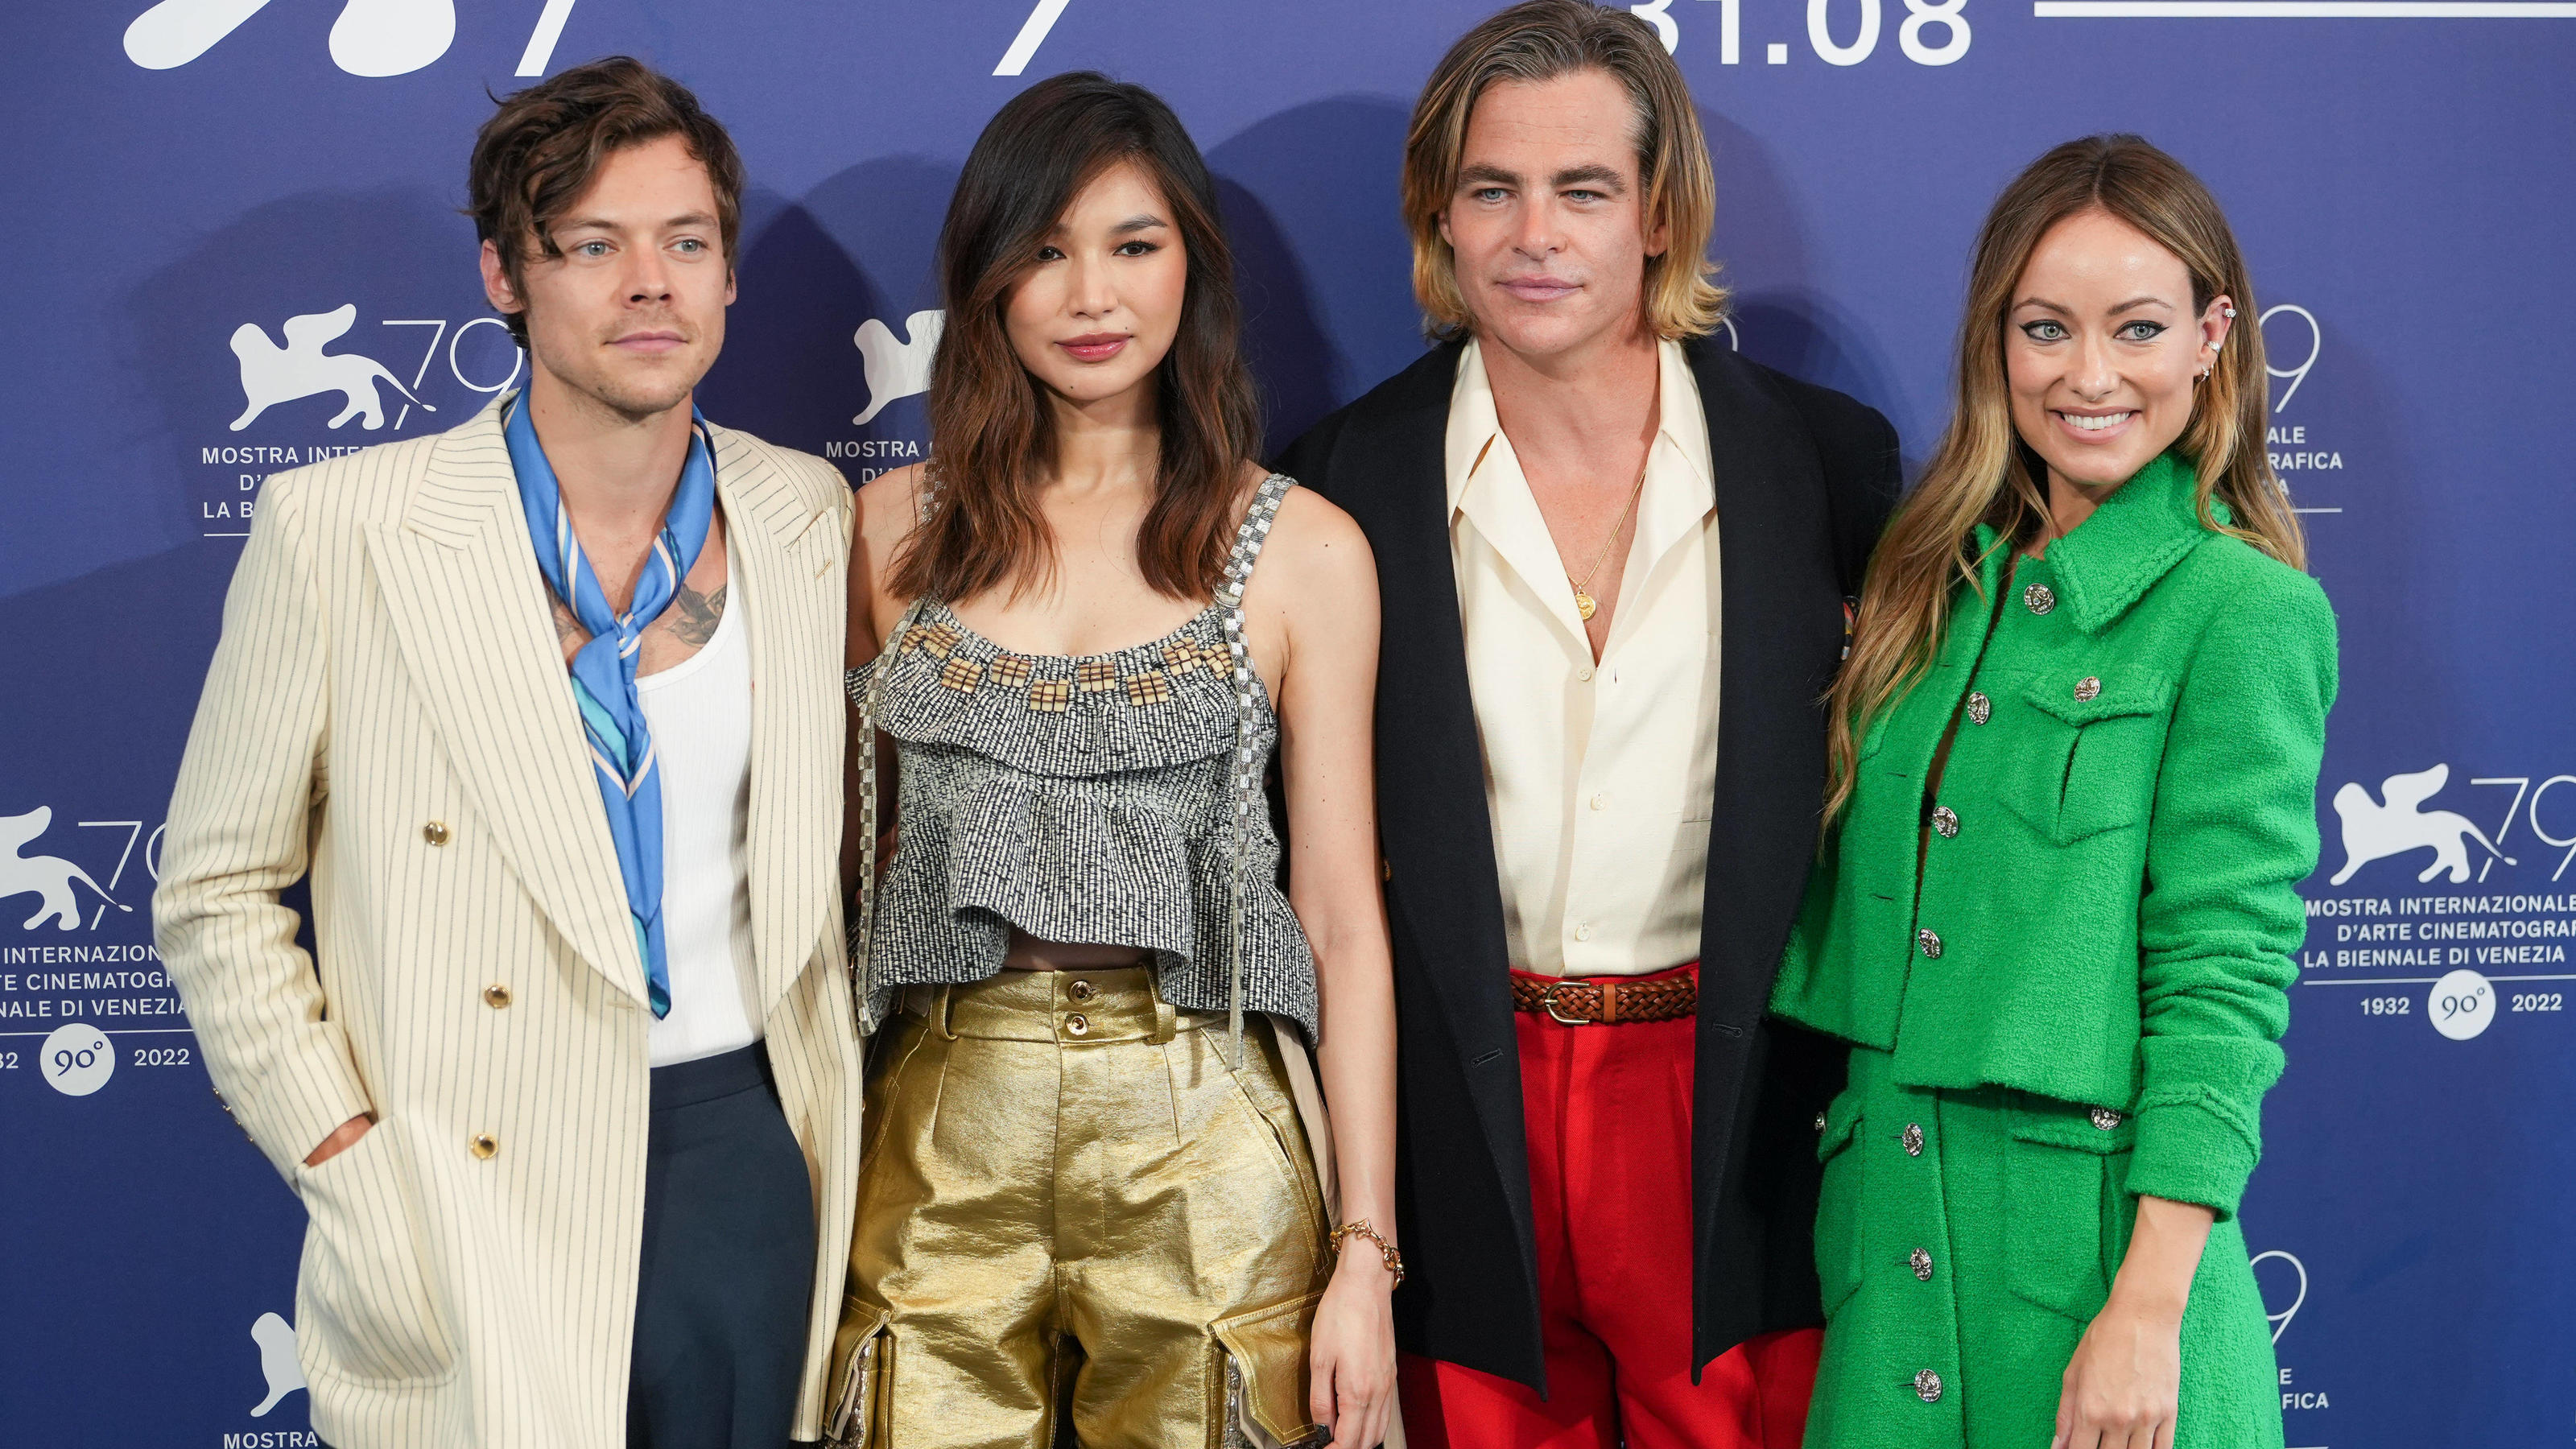 (L-R) Harry Styles, Gemma Chan, Chris Pine and director Olivia Wildearriving for the photocall for â€˜Don't Worry Darlingâ€â during the 79th Venice International Film Festival on September 05, 2022 in Venice, Italy. //03VULAURENT_MOSTRA_2022_07804/22